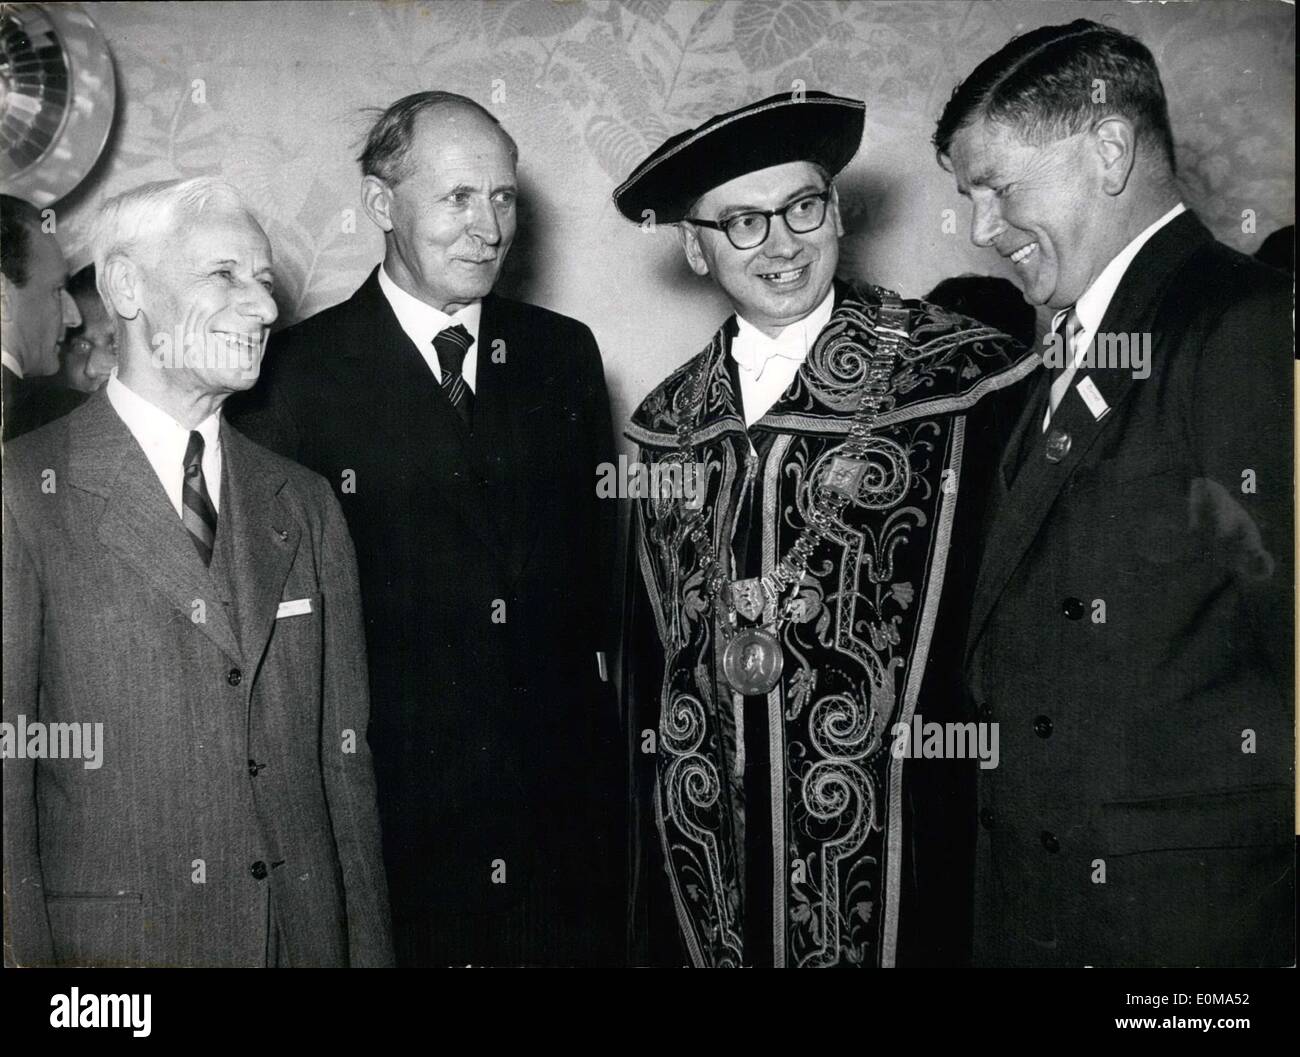 Mar. 15, 1954 - In celebration of the 100th anniversary of the birthdays of the great scientists and doctors Paul Ehrlich and Emil von Behring, a memorial party was thrown in Frankfurt and Marburg. In an academic and festive act, three researchers were honored with the Emile Behring Prize in the auditorium of Philipps University. Our picture shows(from left to right) Professor Heidelberger of New York, Professor Dr. Schmidt of Marburg, headmaster Dr. Walcher, and Sir Mcfarlaus Burnet of Melbourne, Australia. Stock Photo